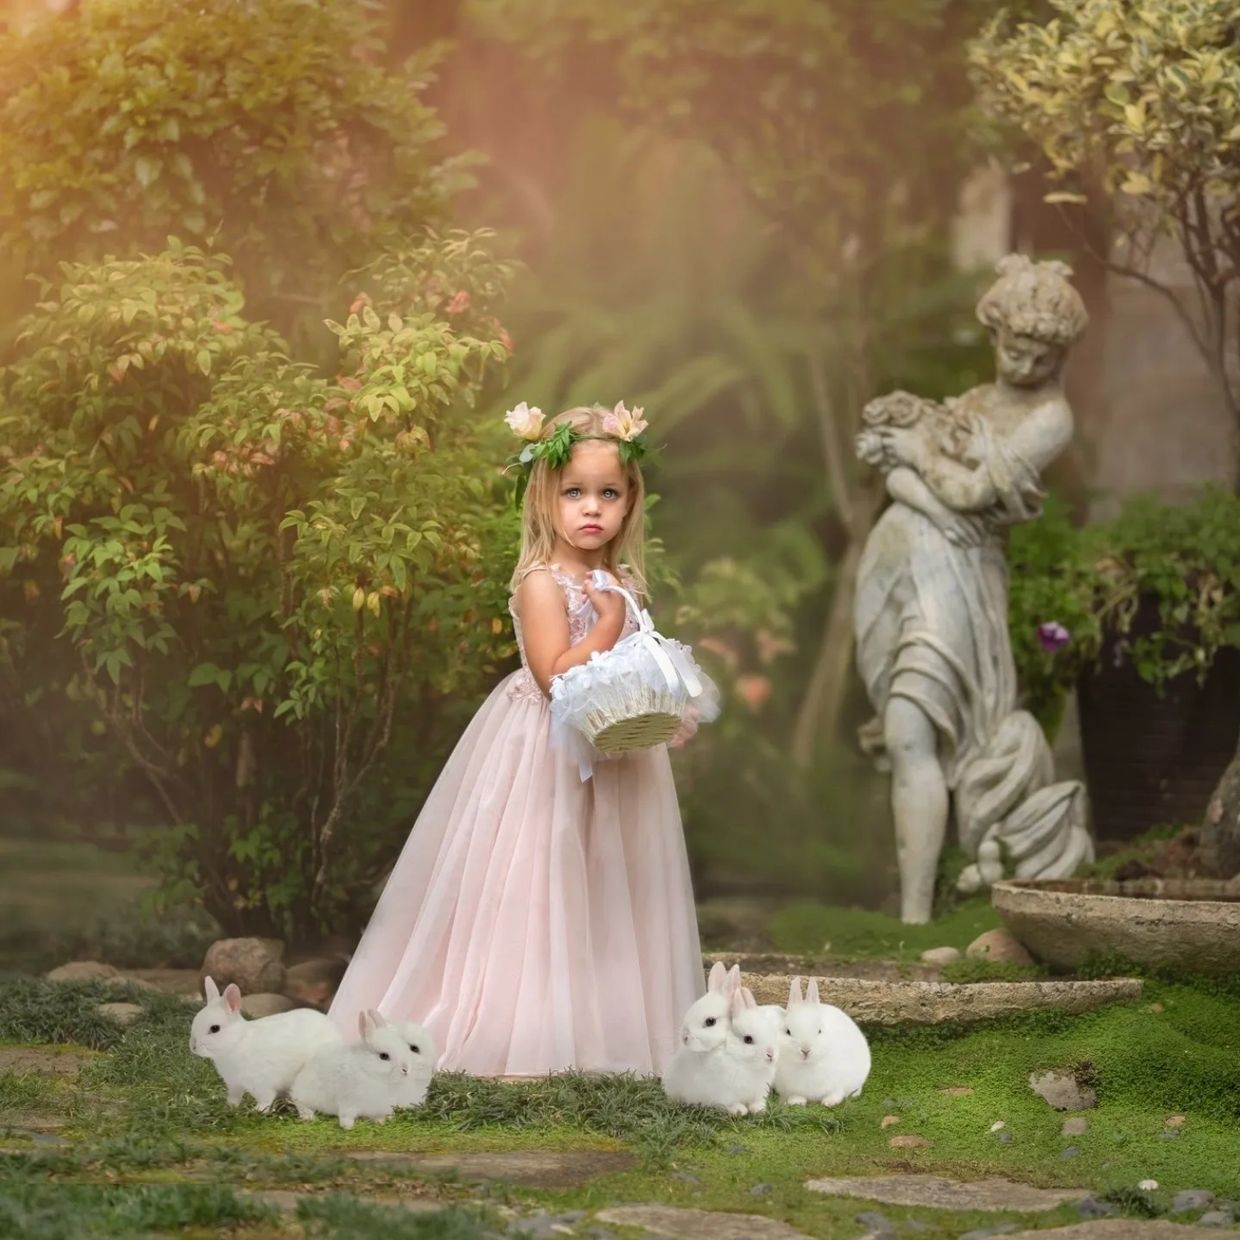 Flower girl dressed in a pink dress with bunnies surrounding her.